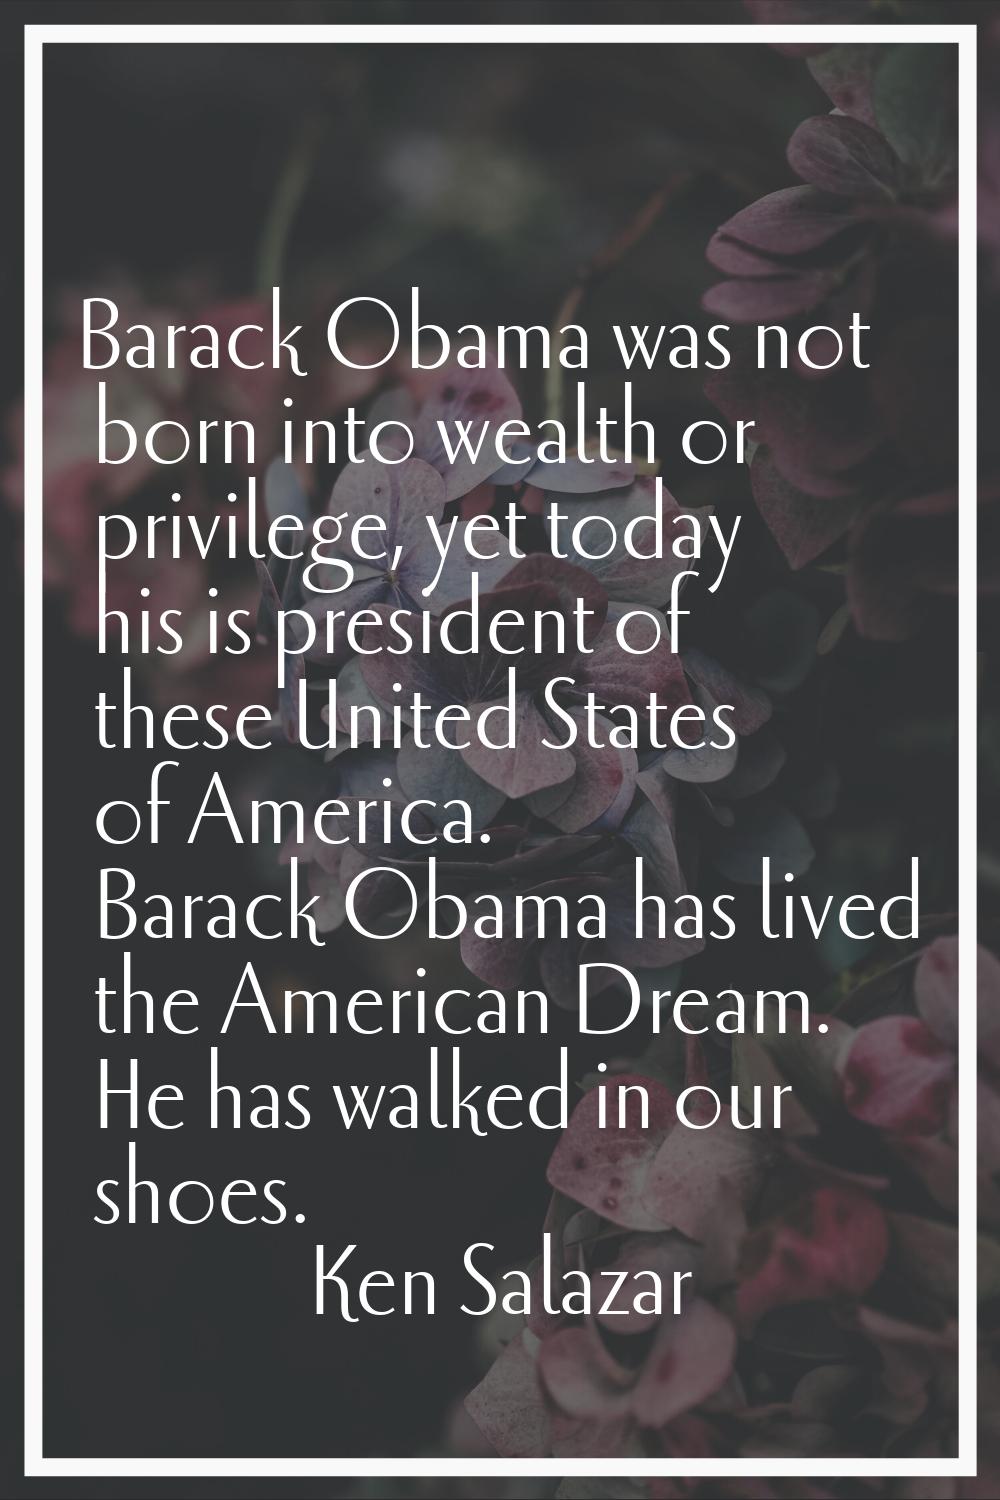 Barack Obama was not born into wealth or privilege, yet today his is president of these United Stat